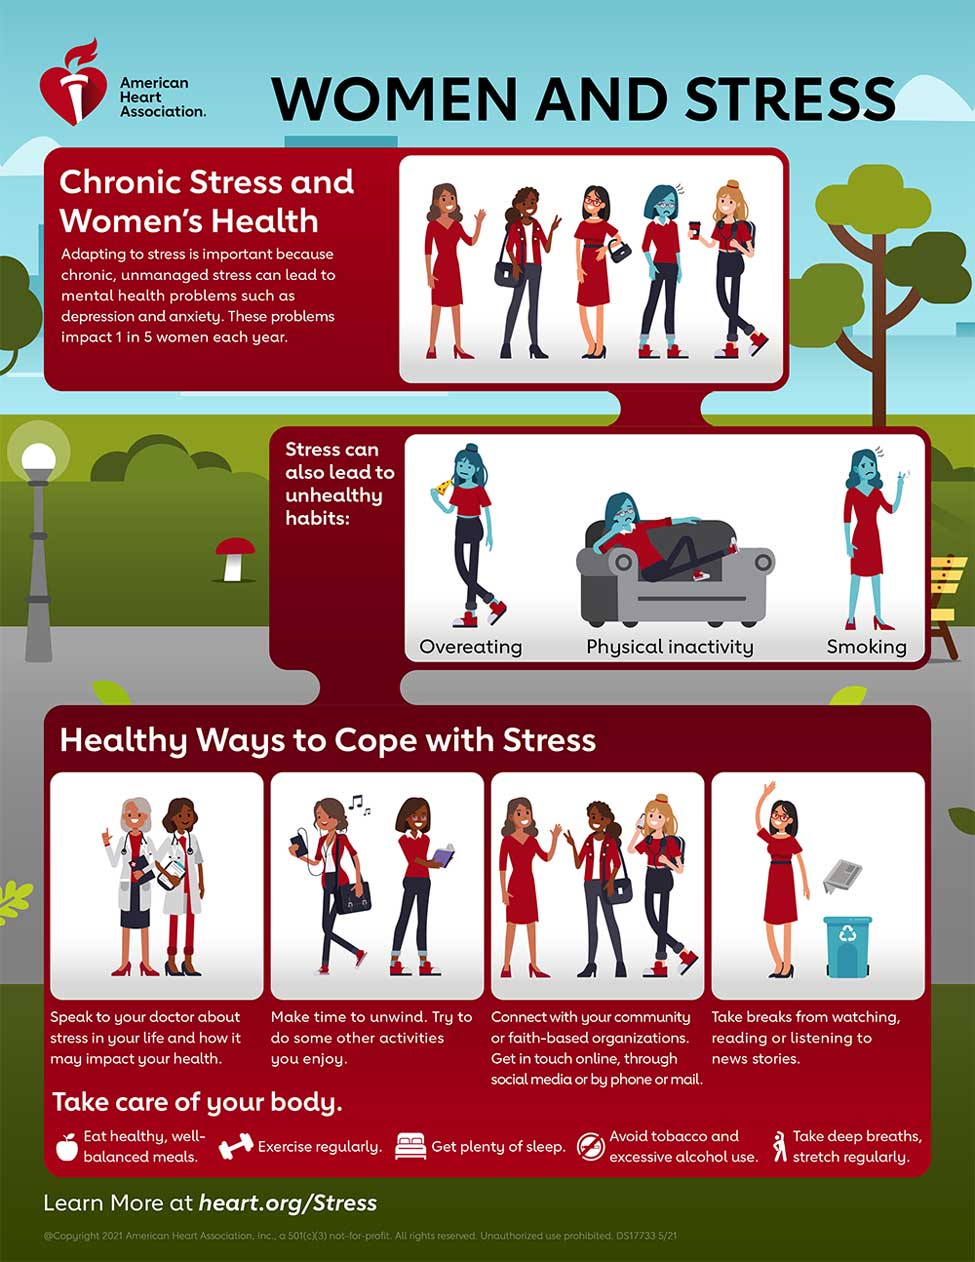 Women and Stress infographic